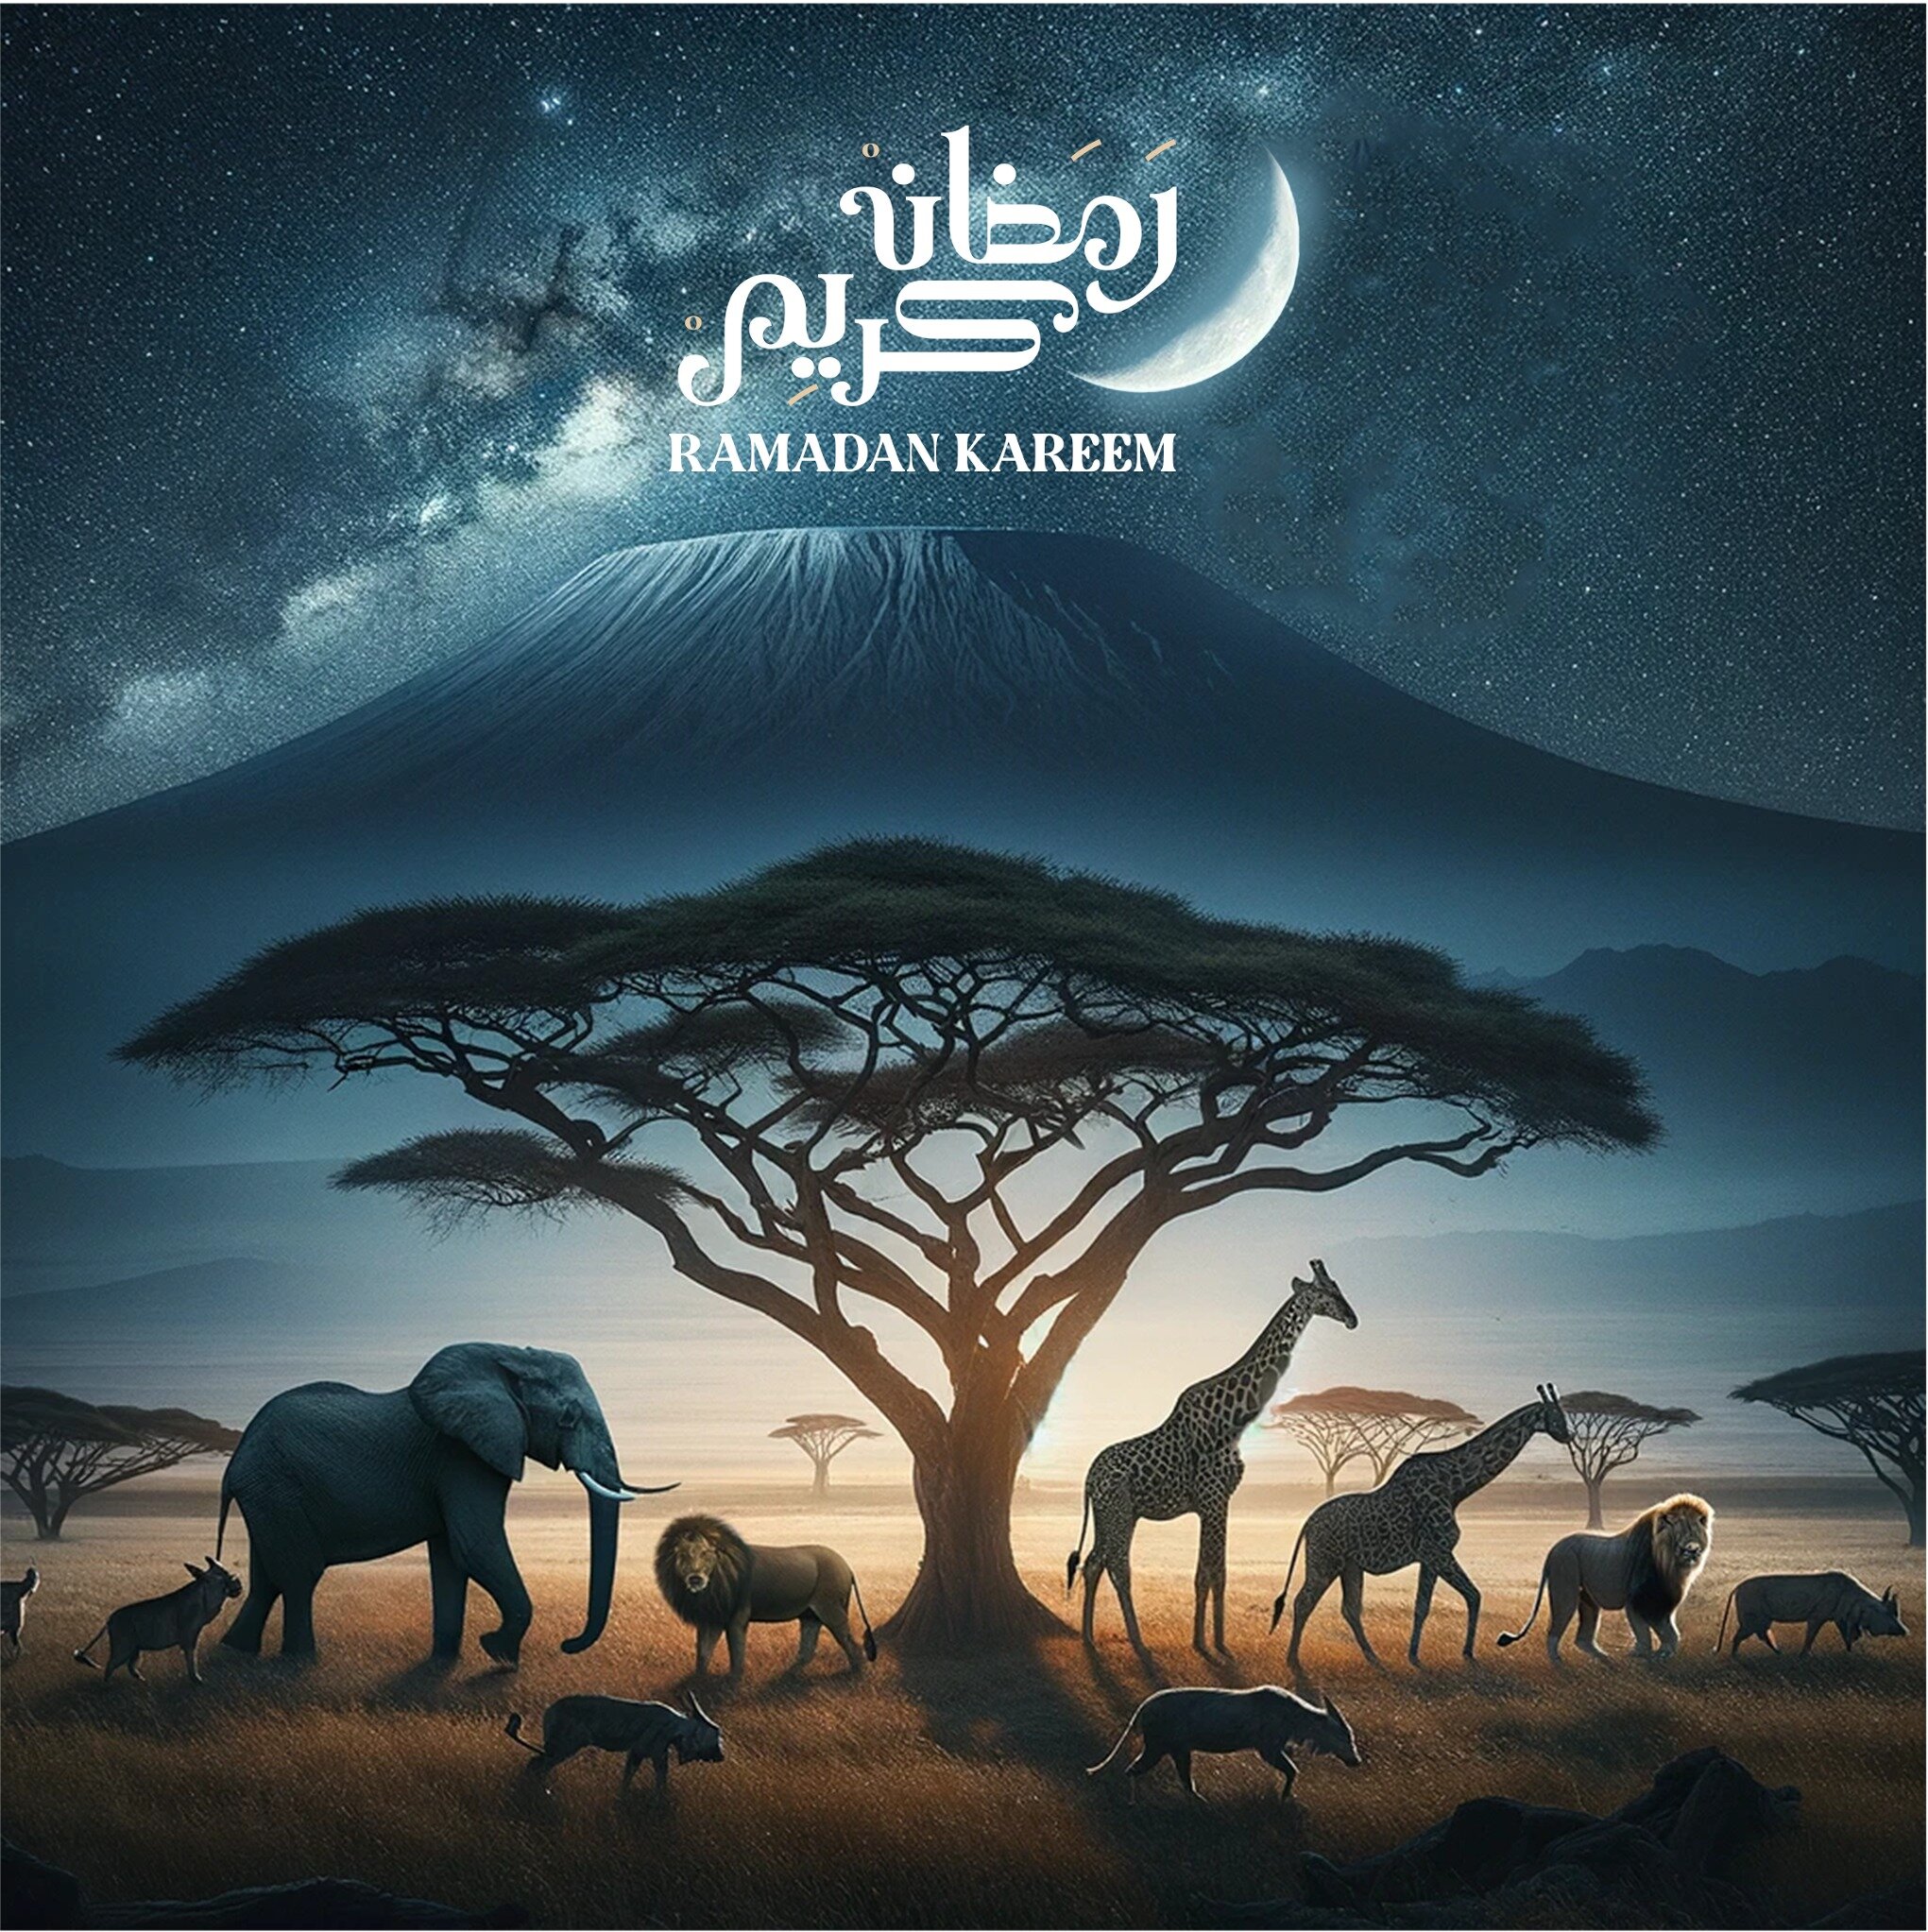 Experience the tranquil beauty of Tanzania under the Ramadan moon. Wishing you a Ramadan Kareem filled with peace as majestic as the Mount Kilimanjaro and as graceful as the wildlife that graces our land. May your journeys this holy month be as enlig